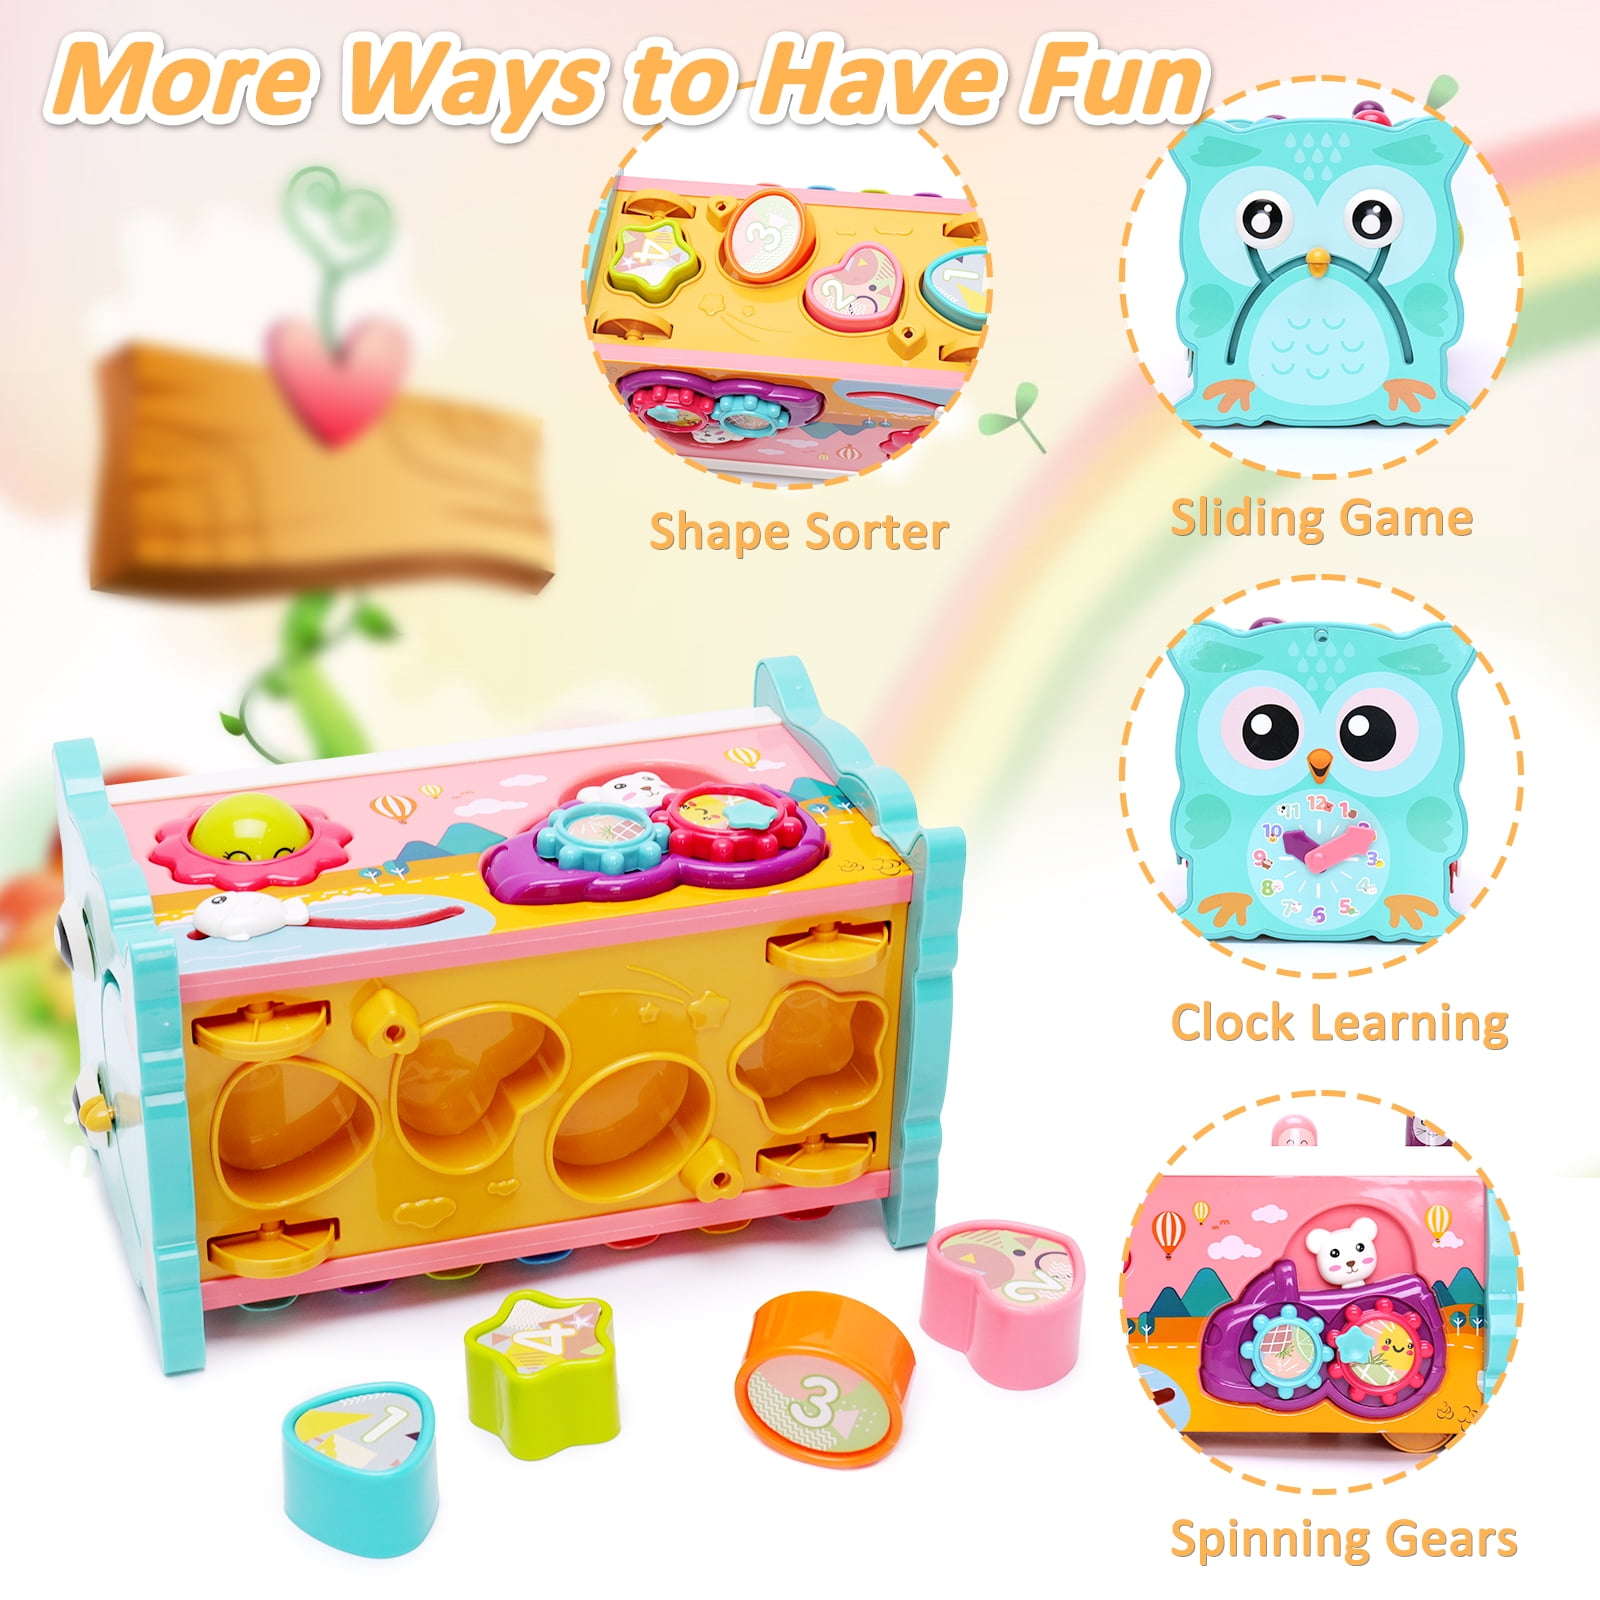 Kids Stuff} 20 Toys for Learning Kids Activities Blog